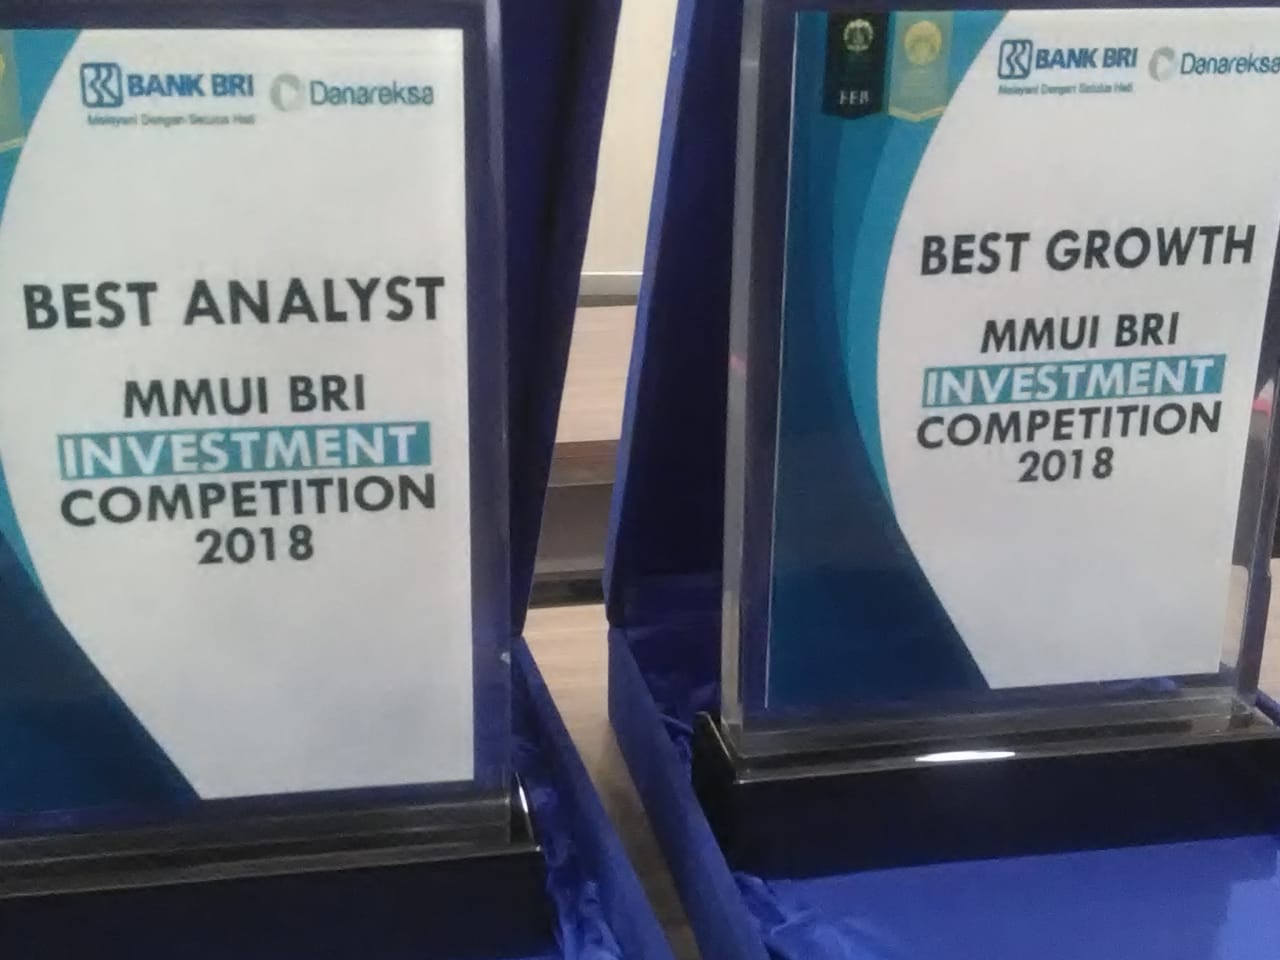 MM FEB Unair di MM UI Investment Competition 2018 a